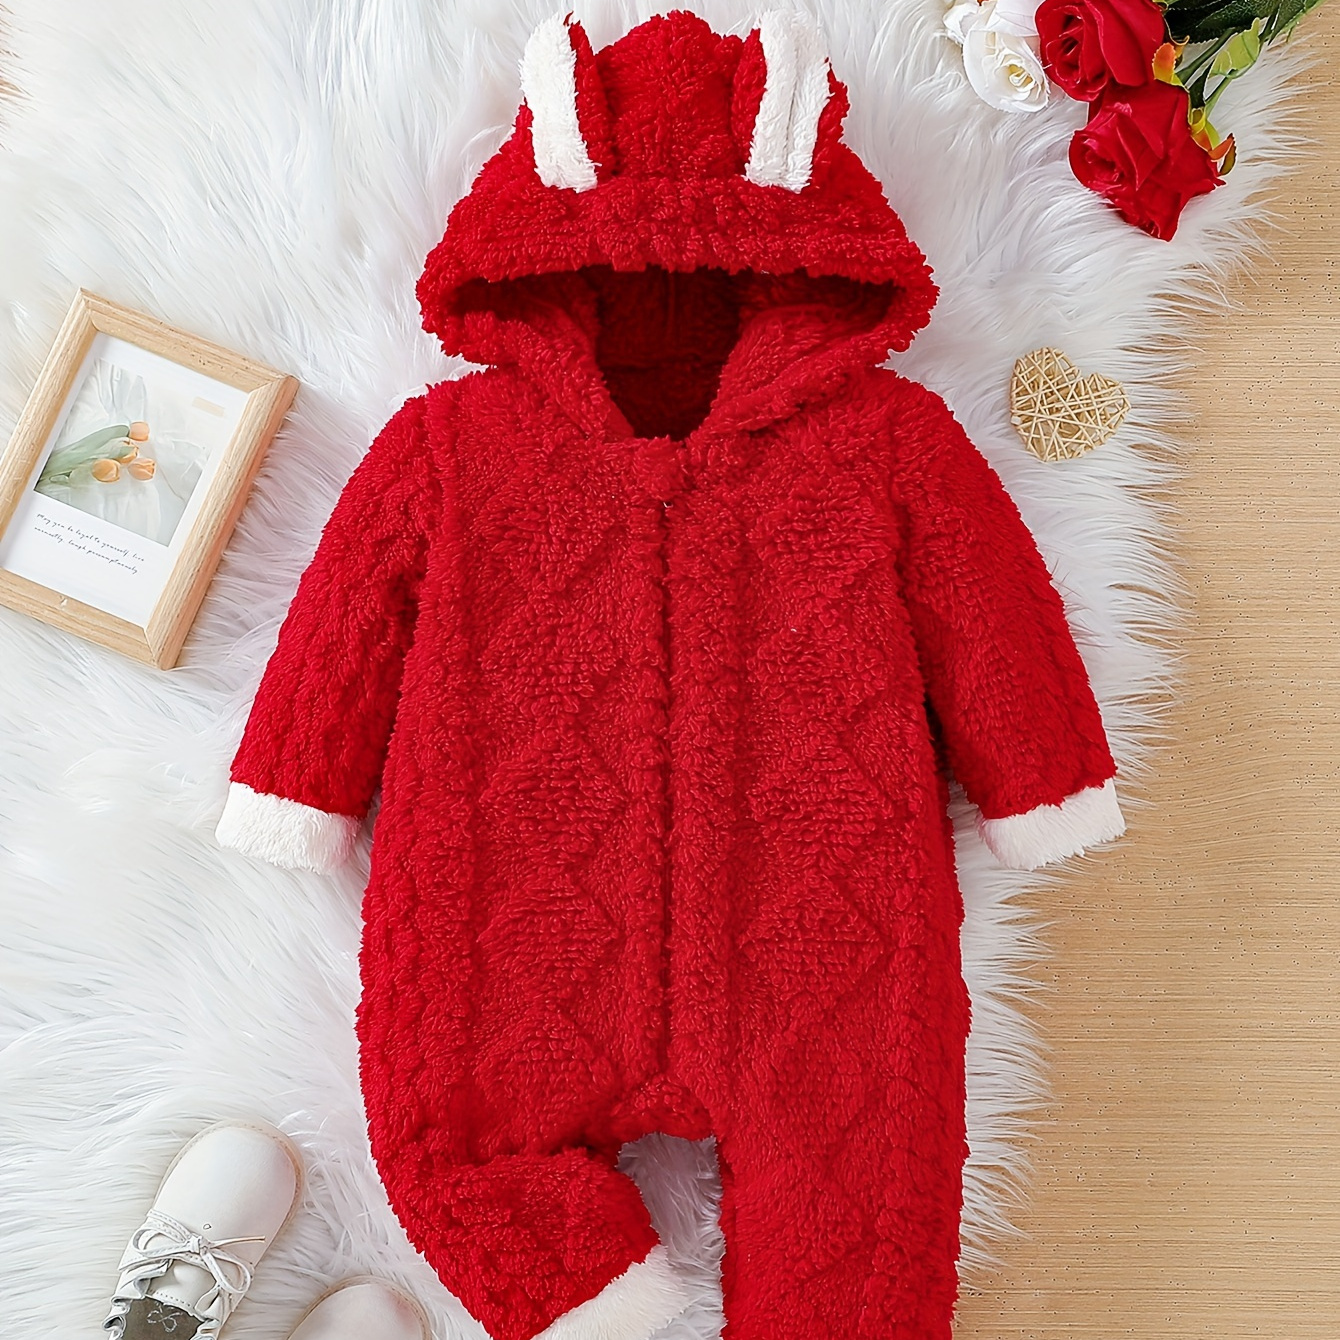 

Baby's Cute Bunny Ears Hooded Jacquard Bodysuit, Soft Casual Warm Long Sleeve Romper, Toddler & Infant Girl's Onesie For Fall Winter, As Gift